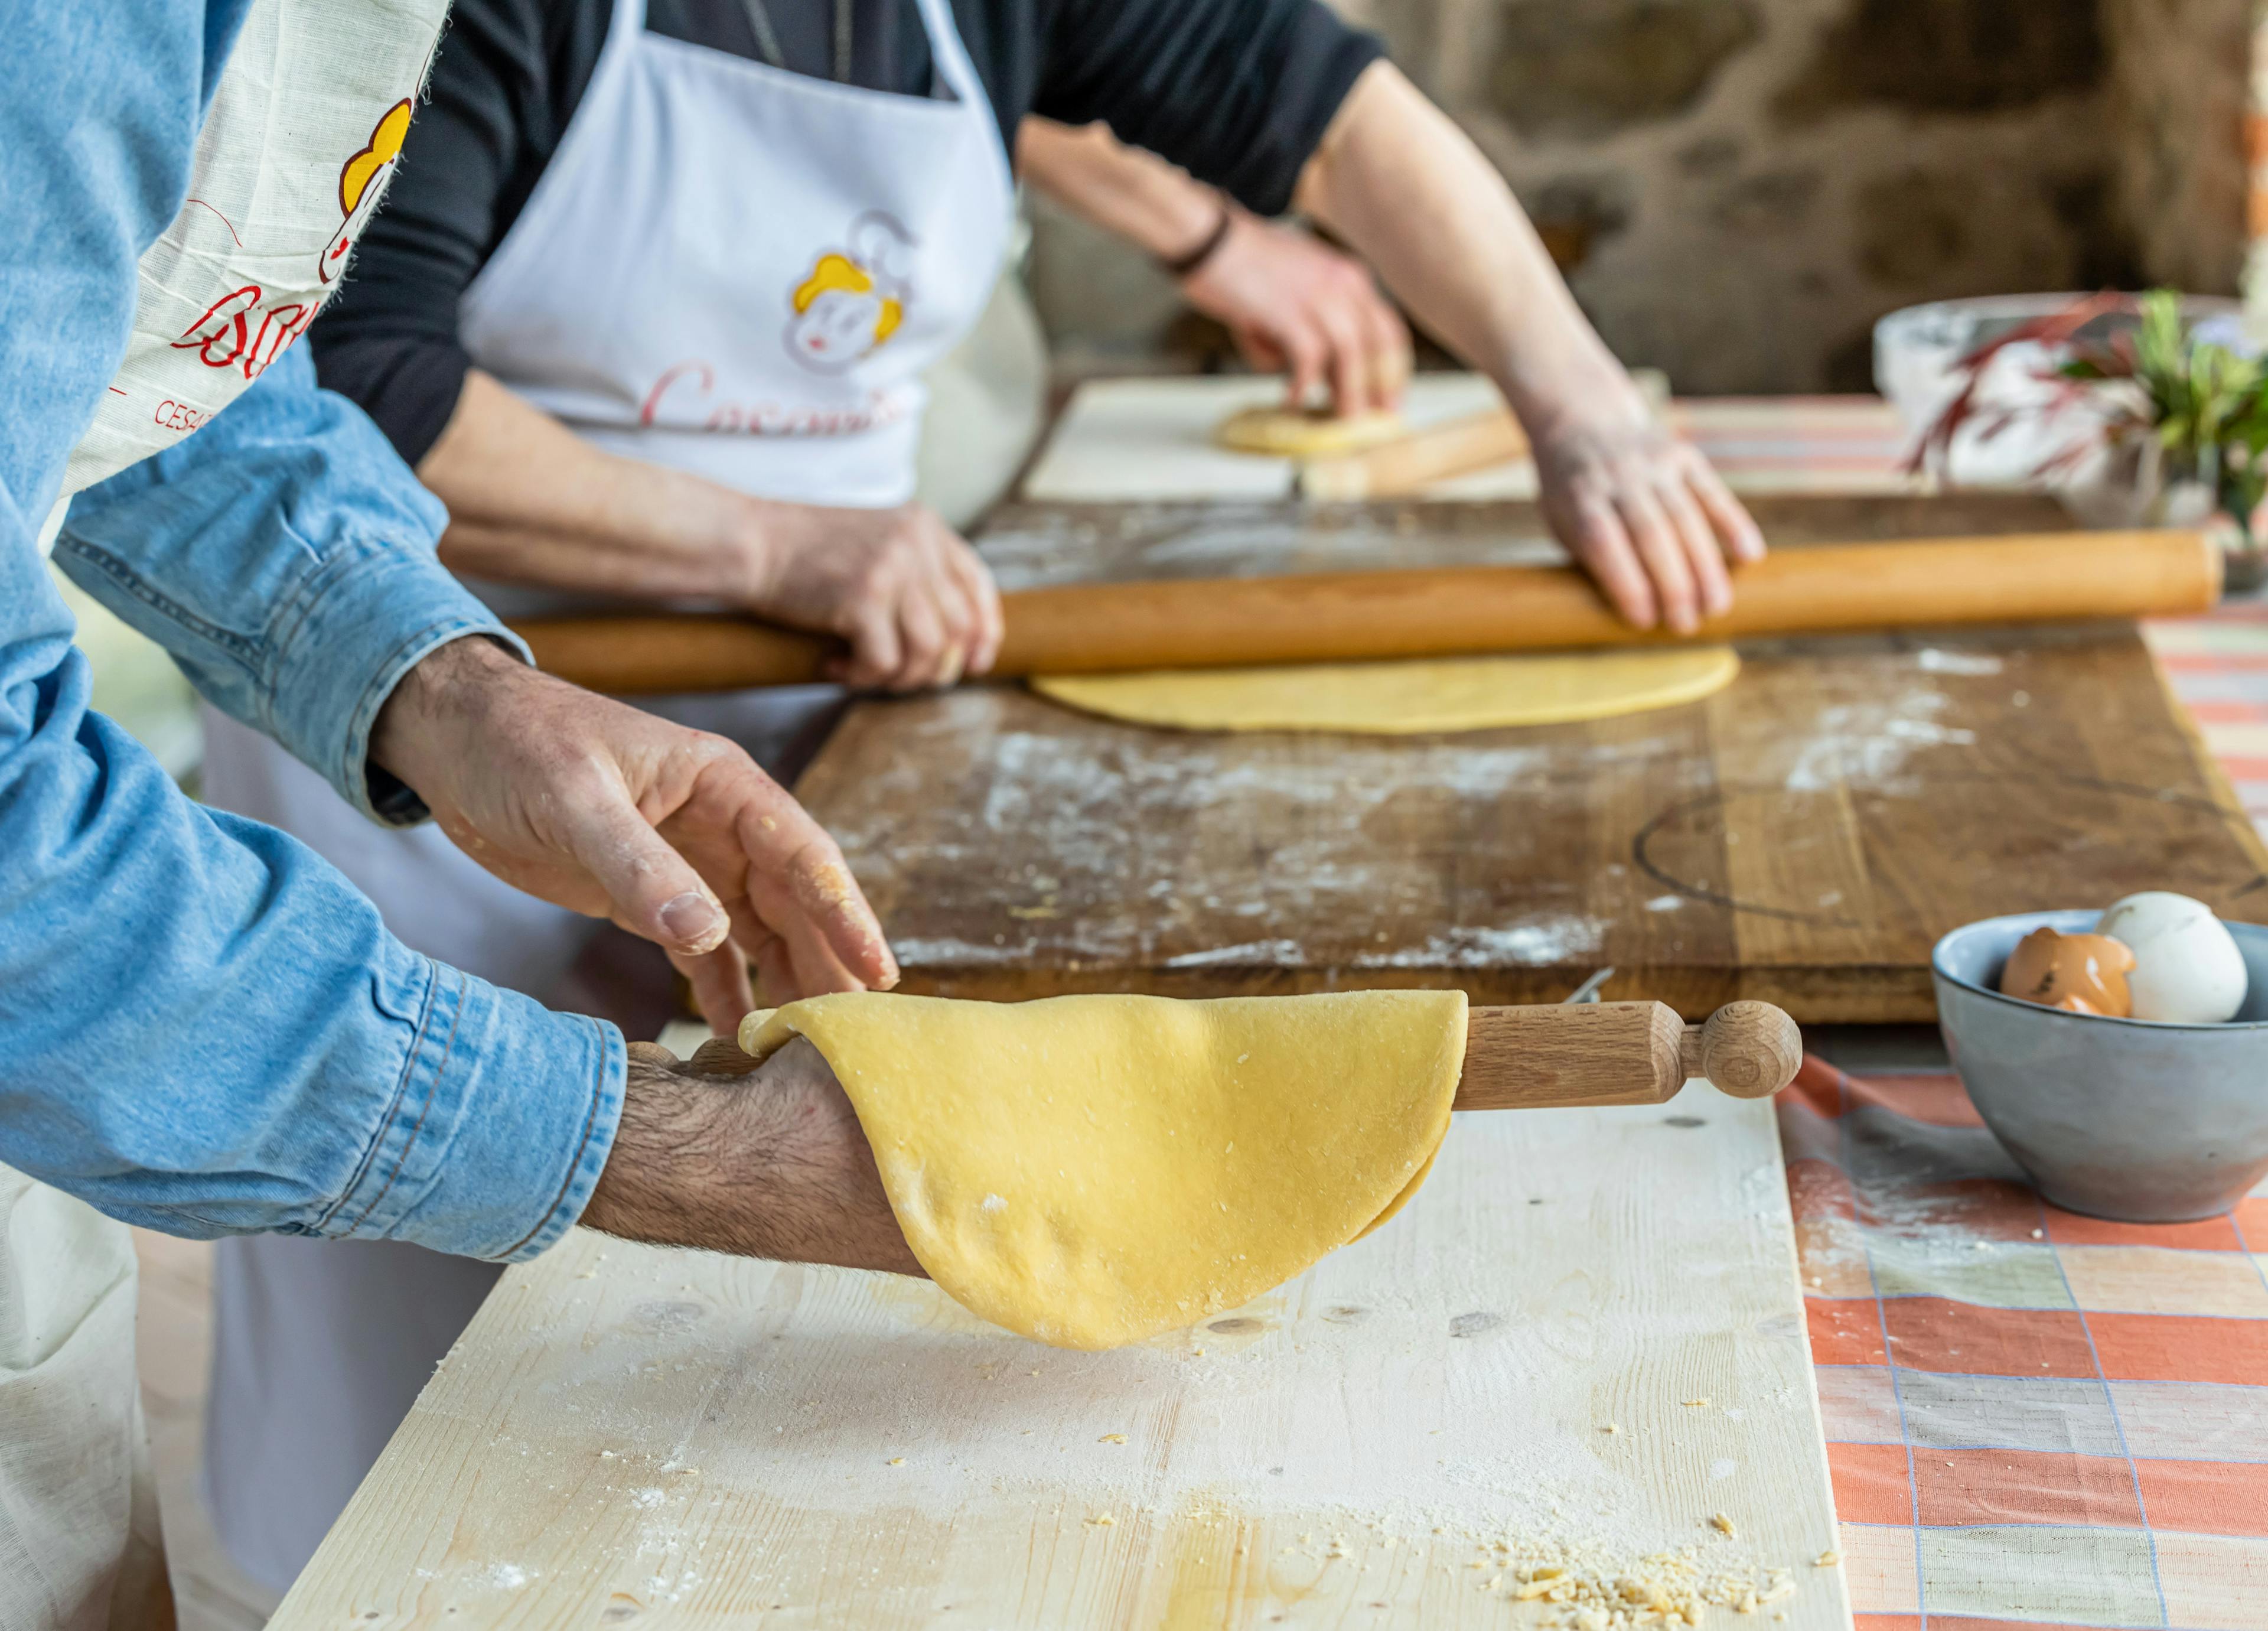 People using rolling pin in a pasta cooking class